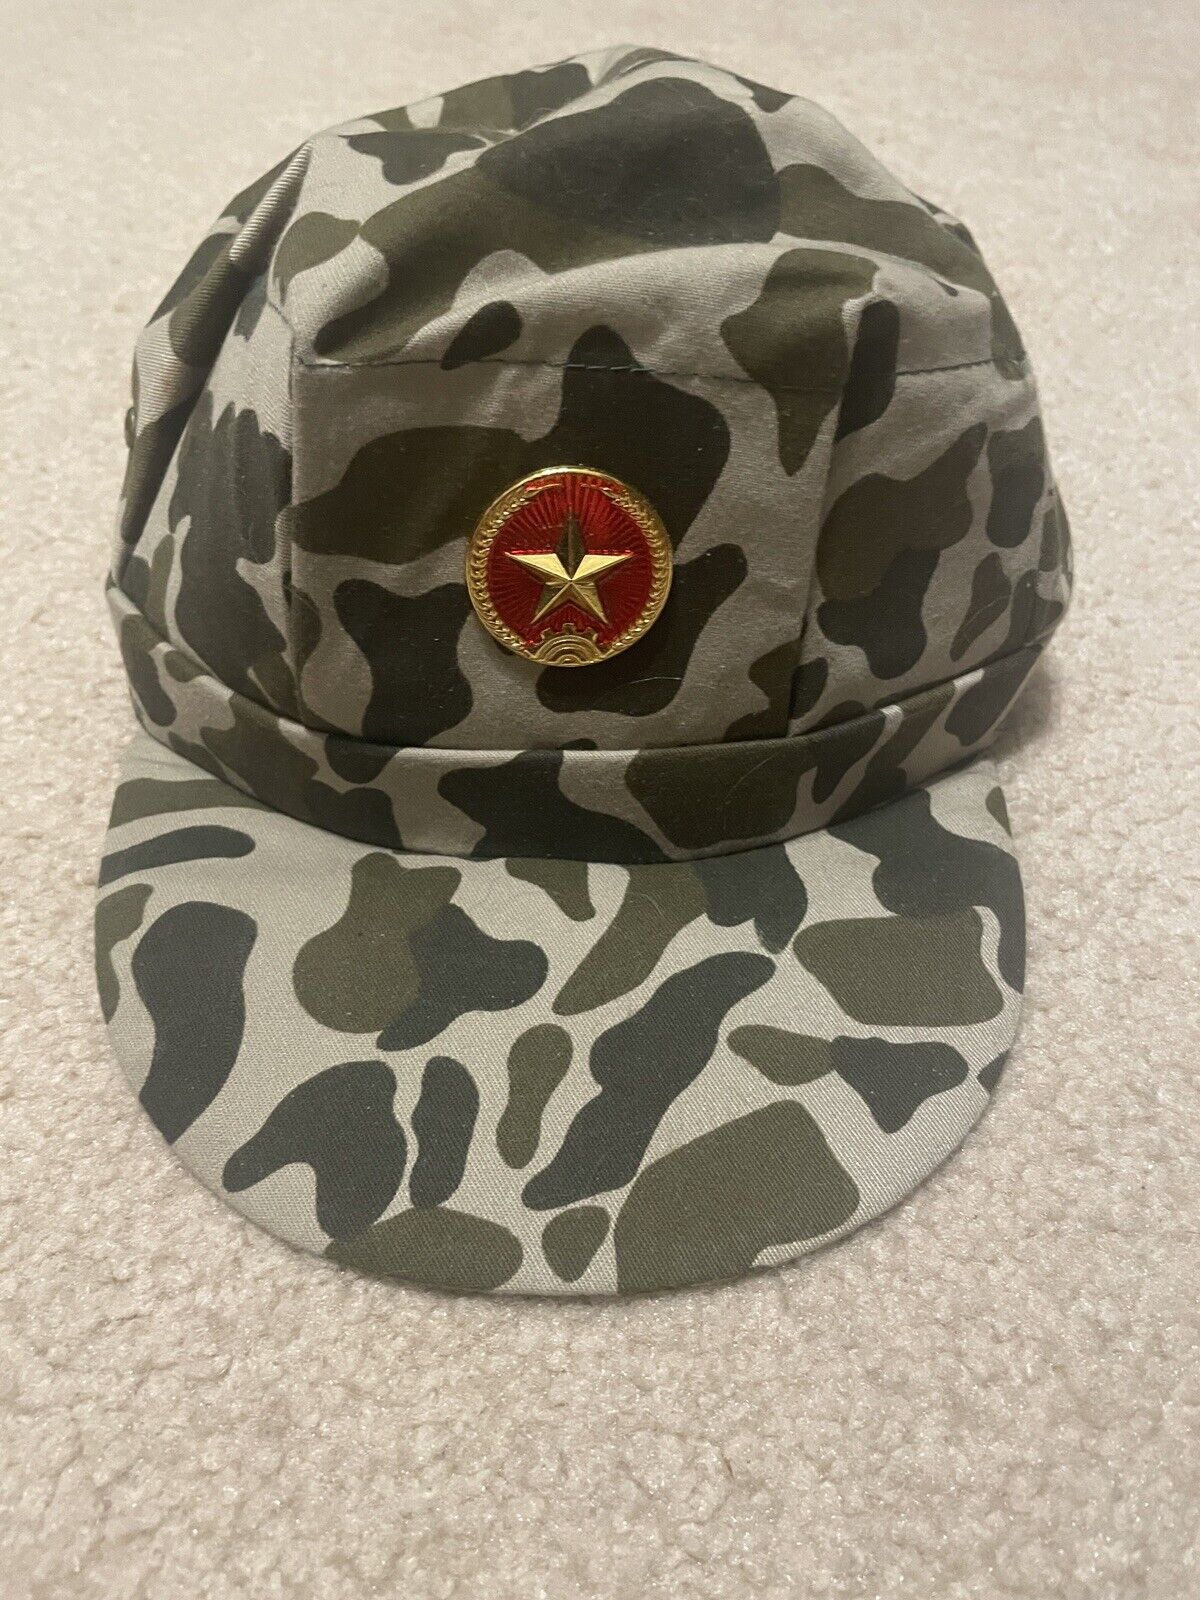 Modern Production Vietnamese Army SF Dac Cong Camouflage Cap With Badge 56